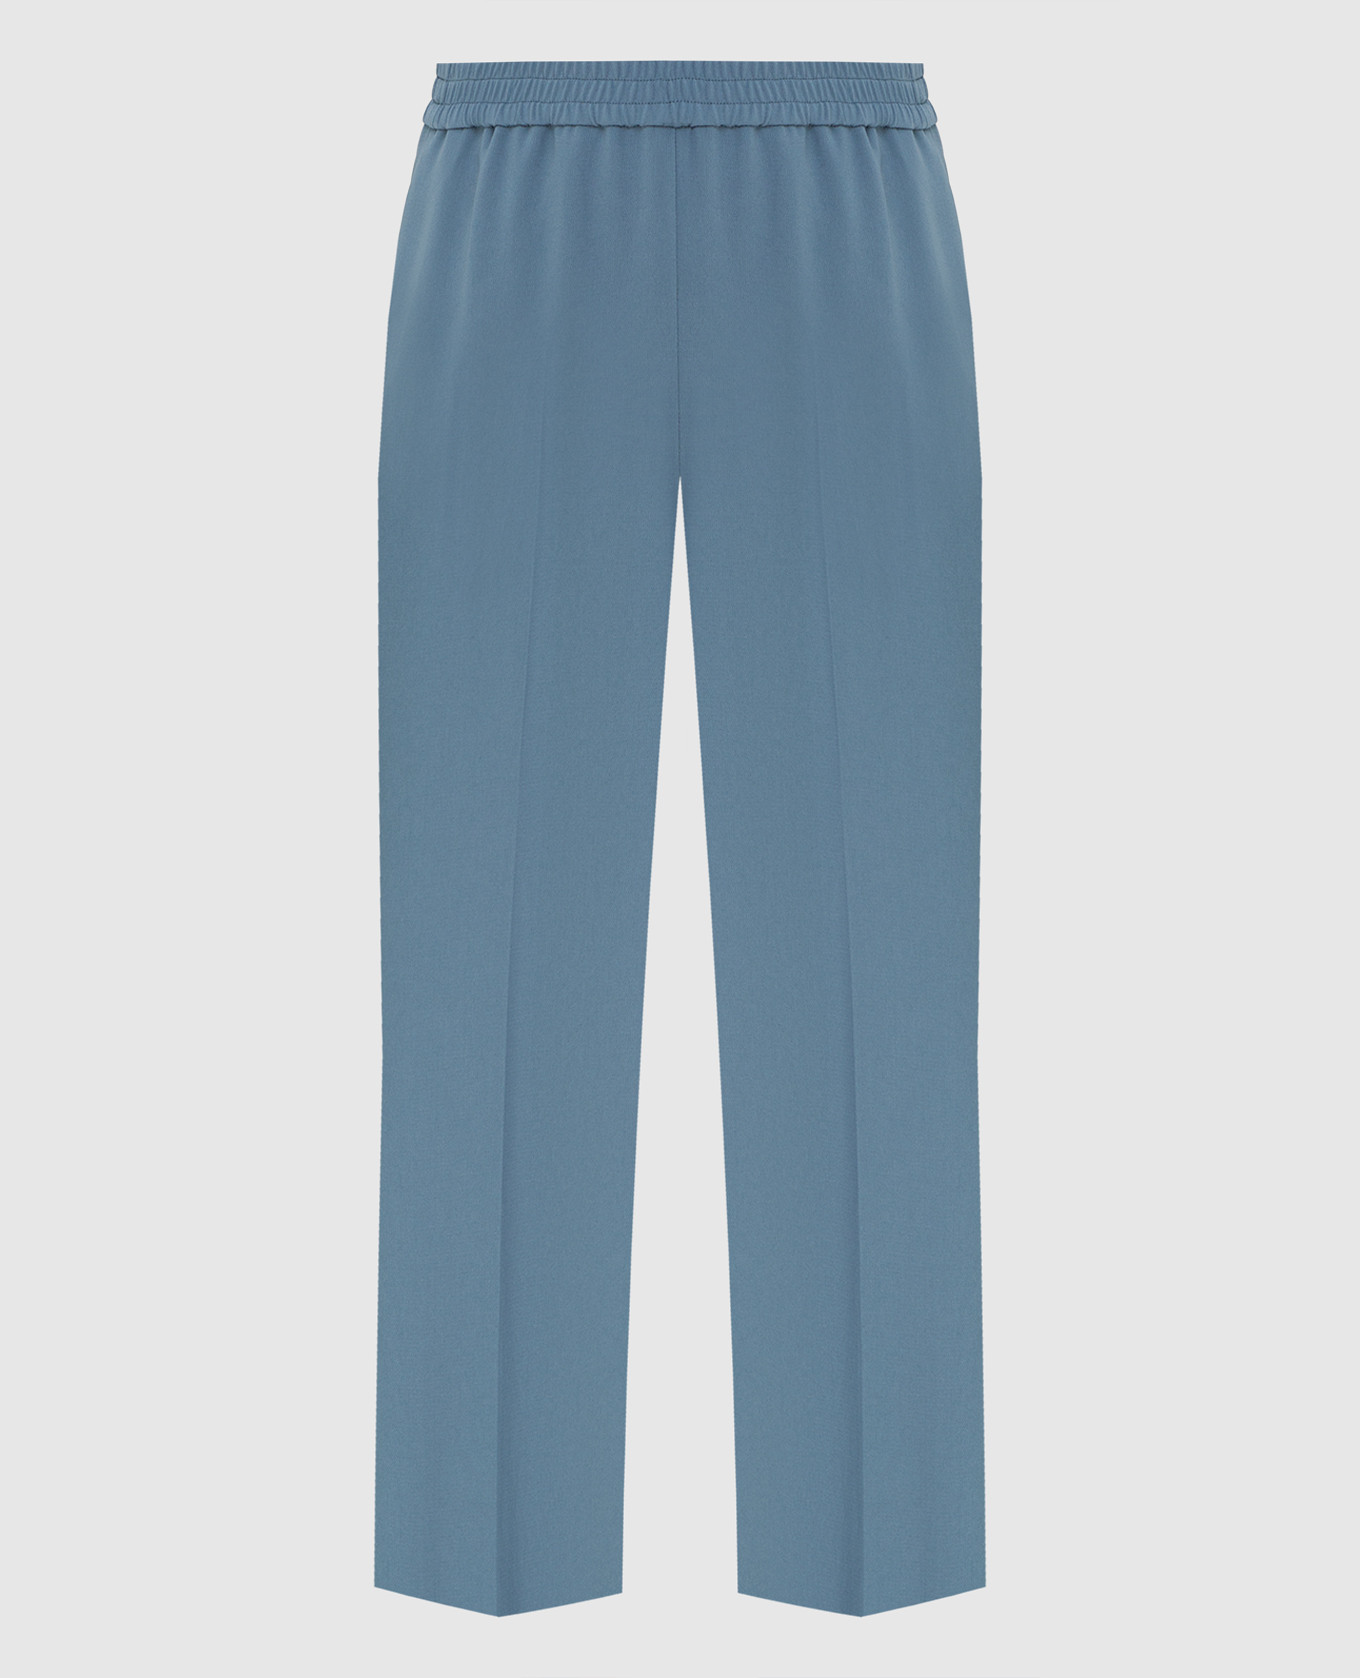 Dark Turquoise Cropped Pants